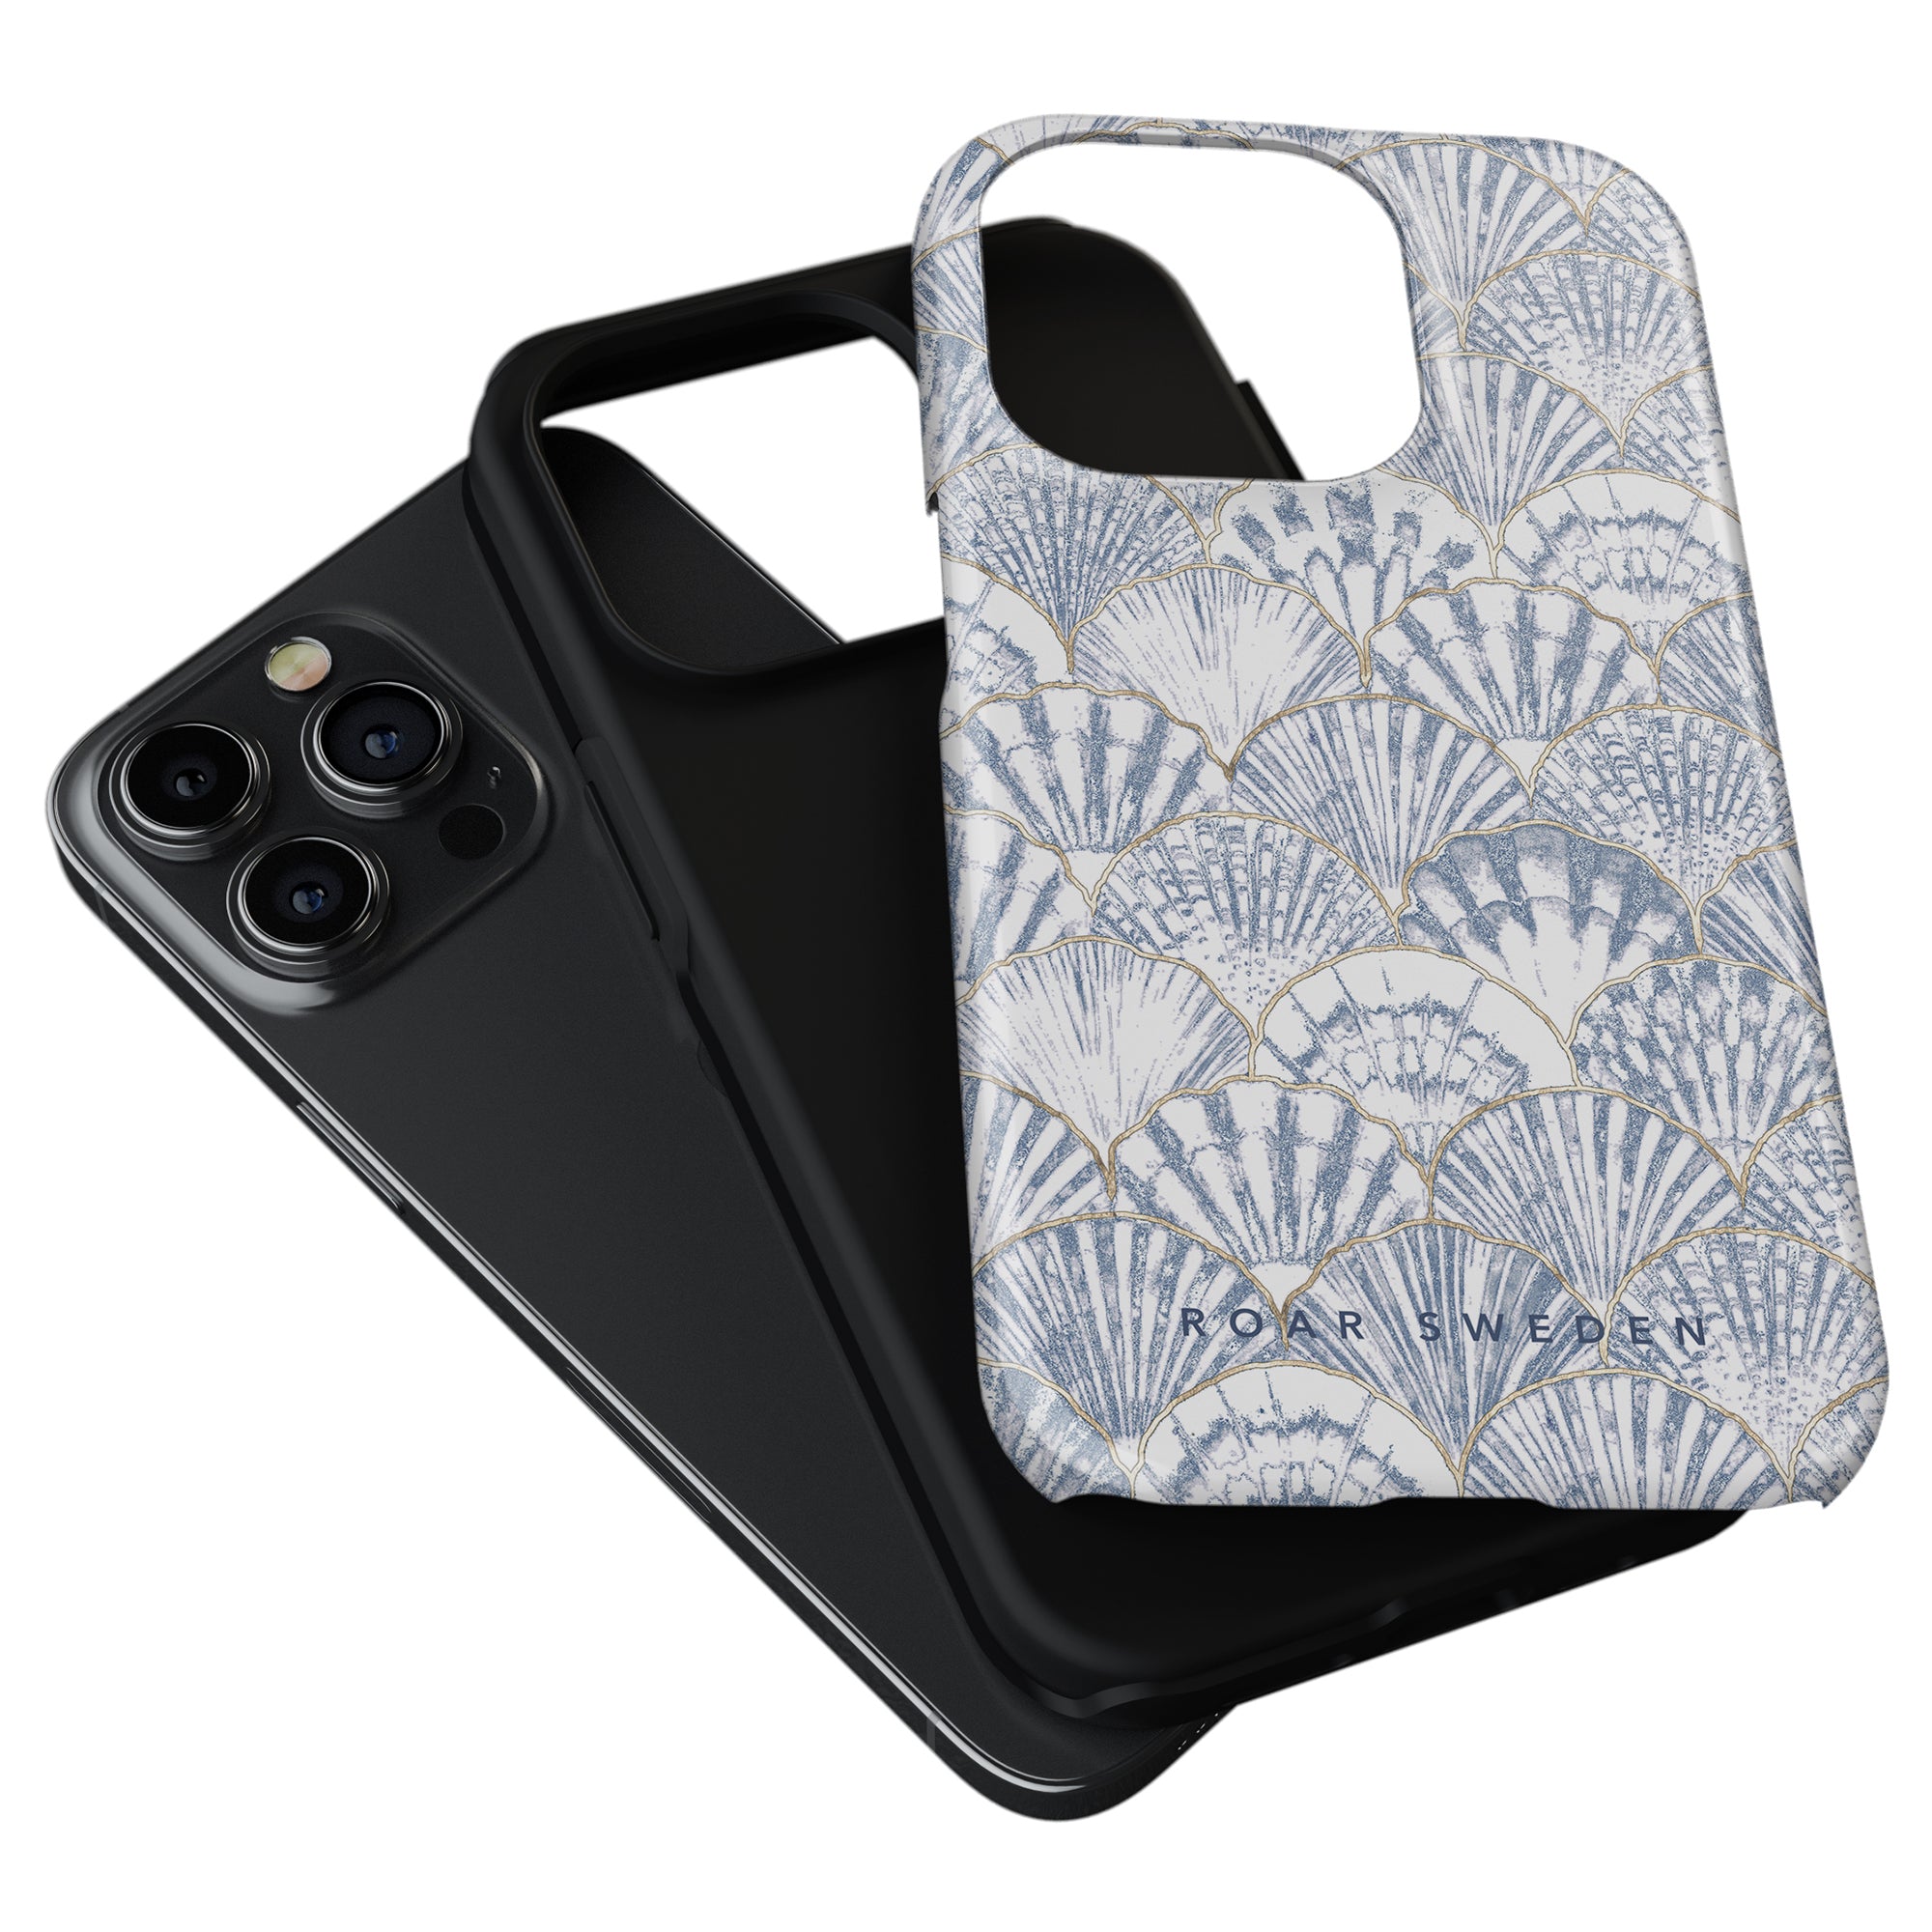 A black smartphone with a triple-lens camera next to a patterned Valencia - Tough Case from the Ocean Collection.